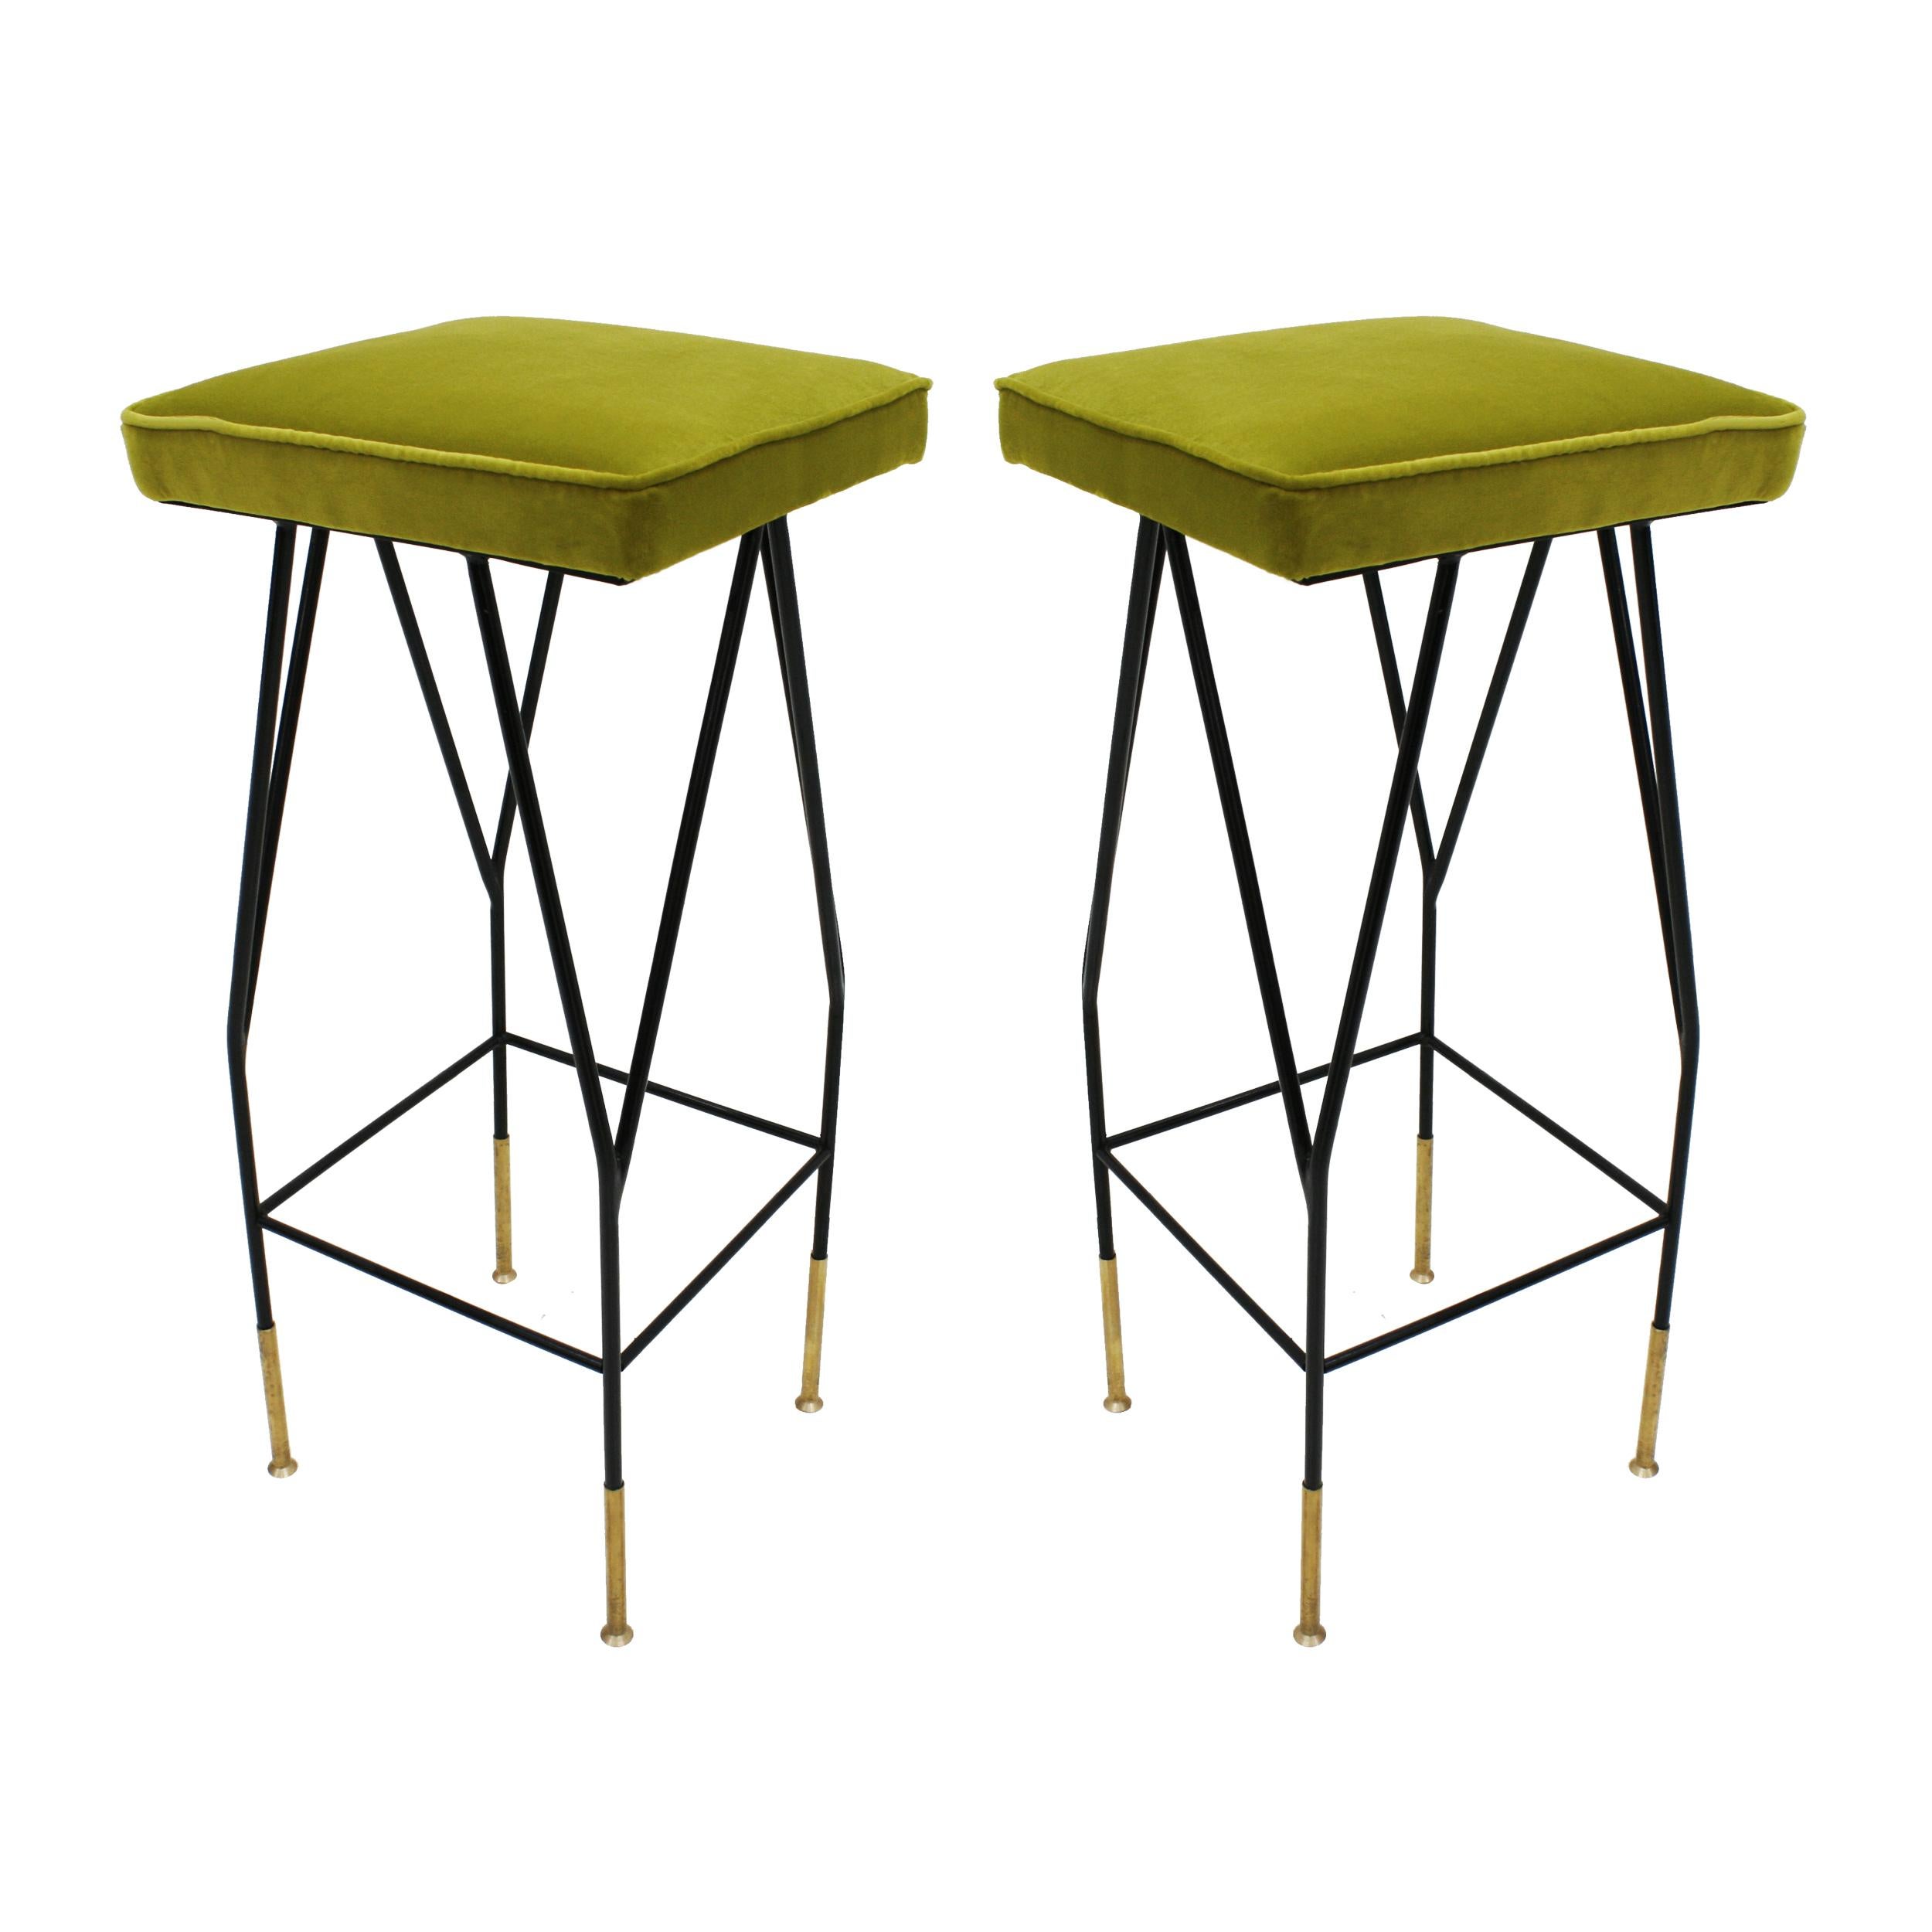 Modern square Italian stool. Made of black lacquered iron structure finished in brass details legs. Square seat made of solid wood upholstered in lime green plain cotton velvet.

Every item LA Studio offers is checked by our team of 10 craftsmen in